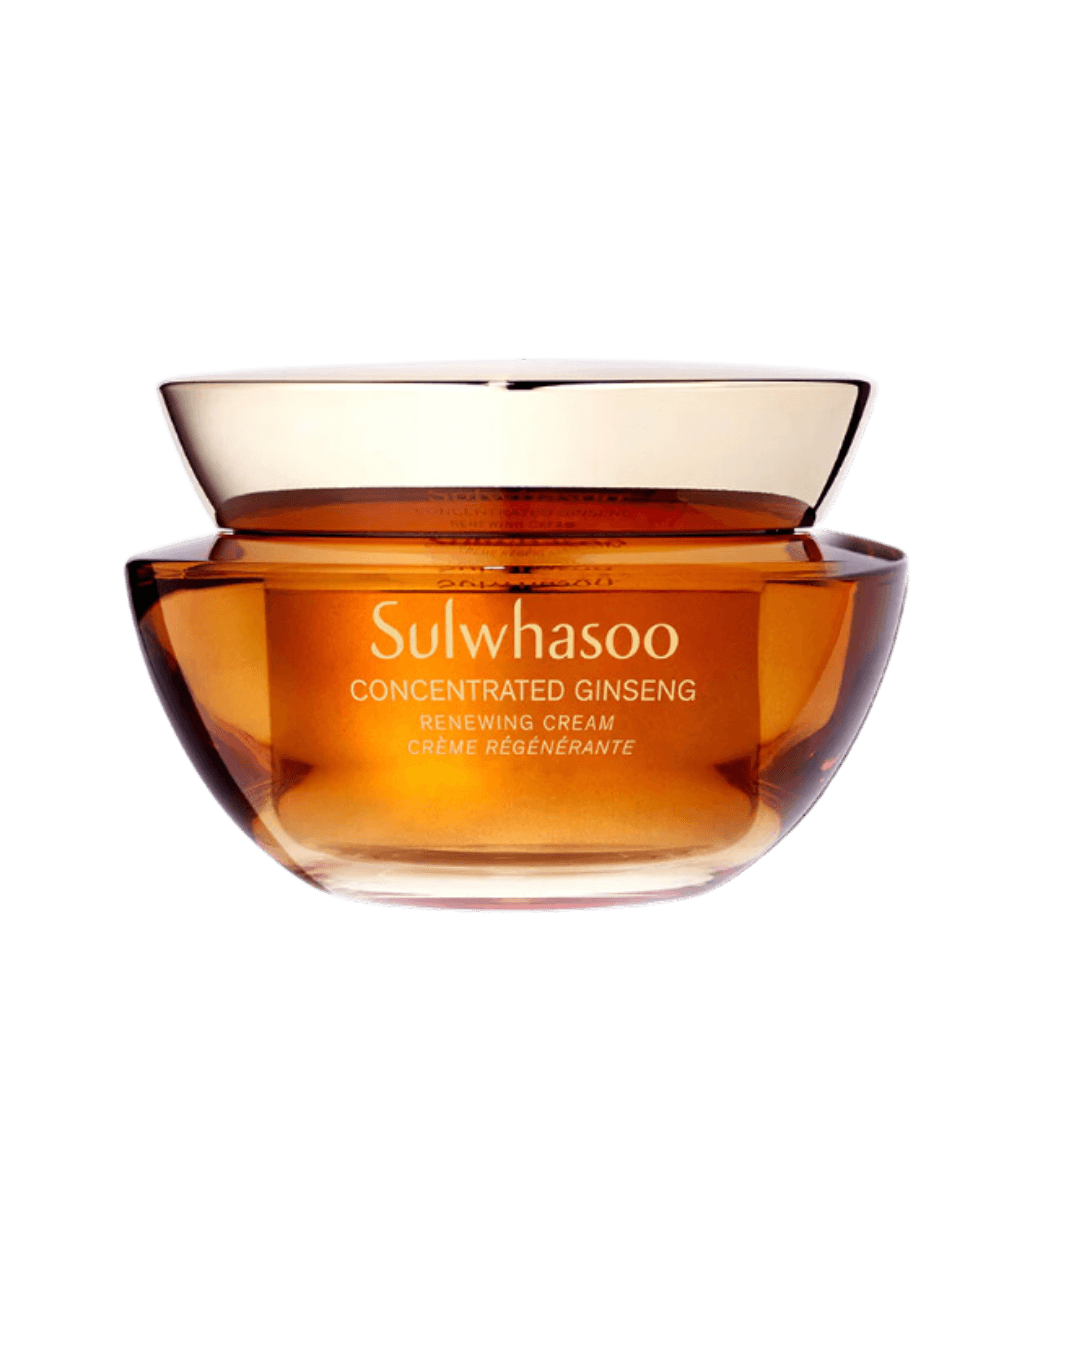 Daily Vanity Beauty Awards 2024 Best Skincare Sulwhasoo Concentrated Ginseng Renewing Cream EX Voted By Beauty Experts